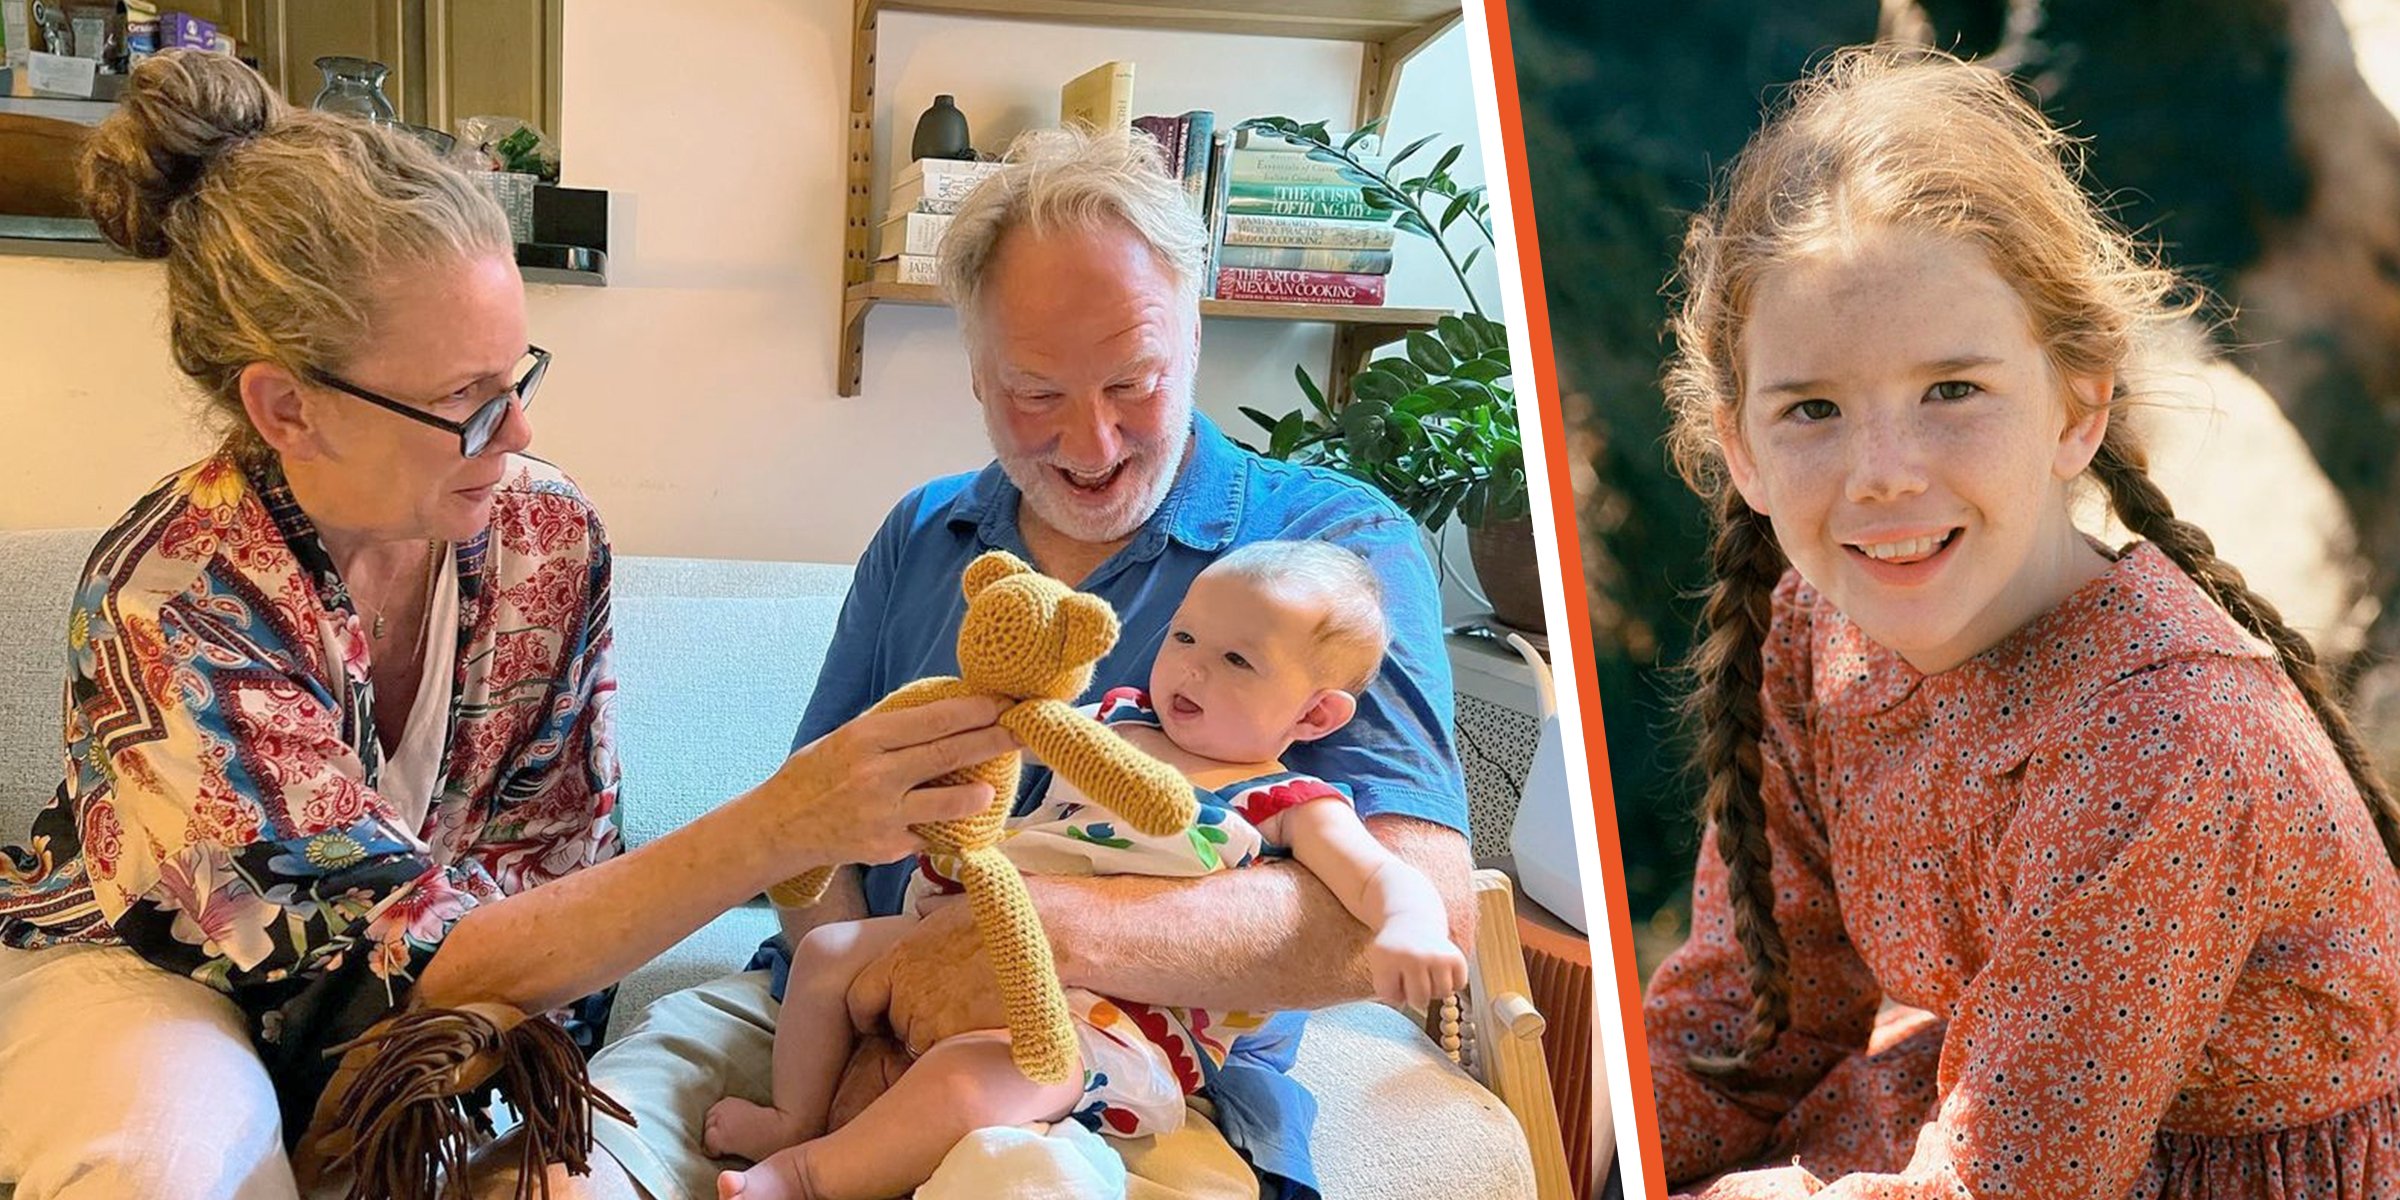 Melissa Gilbert and Timothy Busfield with their granddaughter | Melissa Gilbert as Laura Ingalls Wilder | Source: Instagram.com/melissagilbertofficial | Getty Images